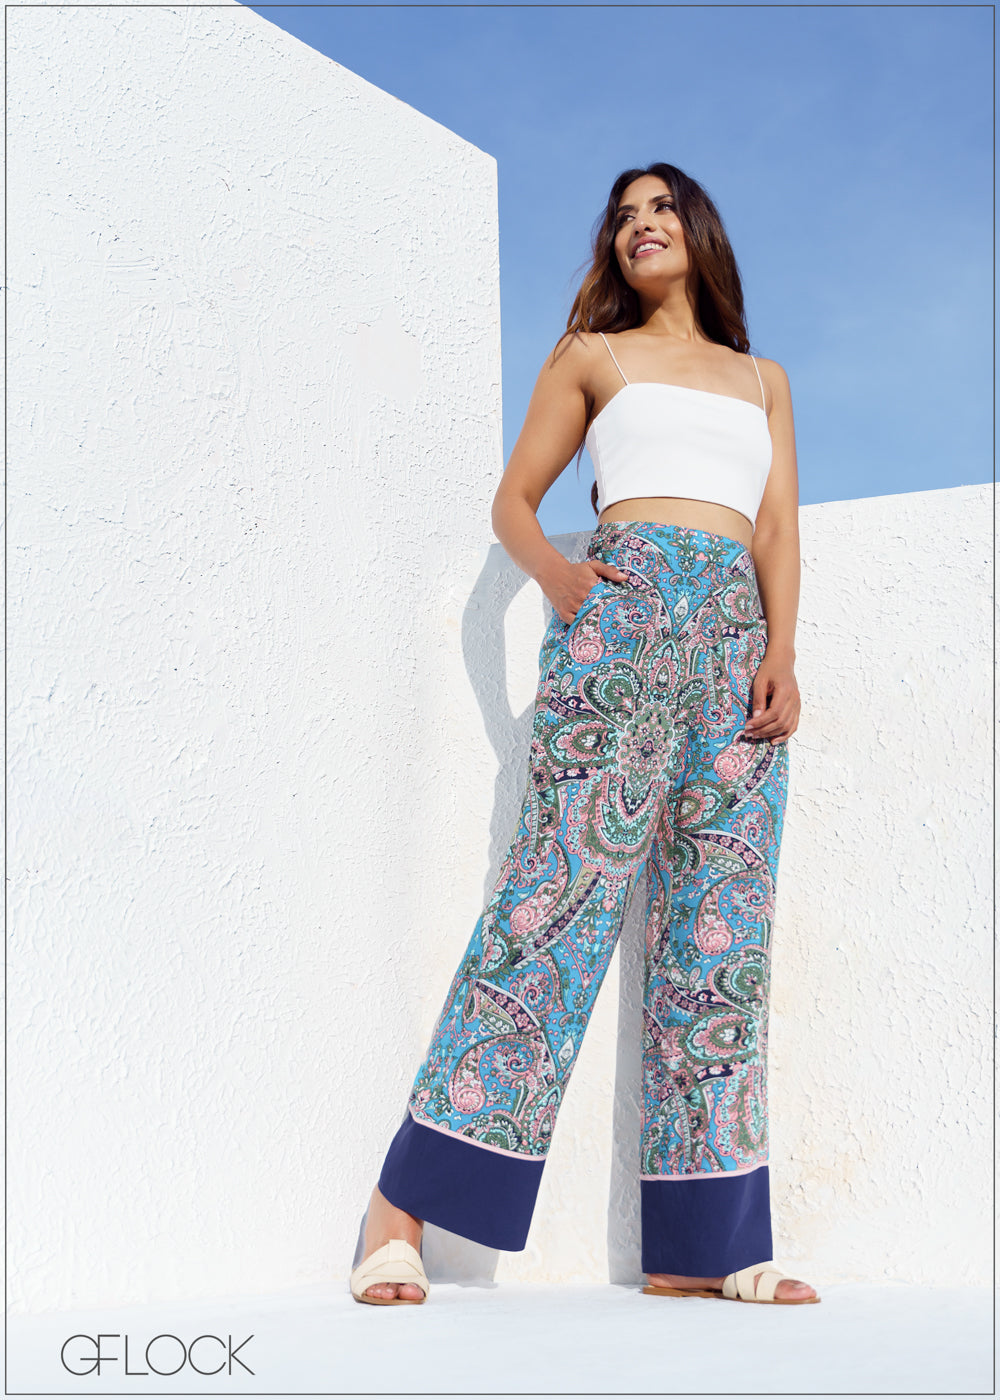 High Rise Stretch Paisley Print Pull-On Jeans